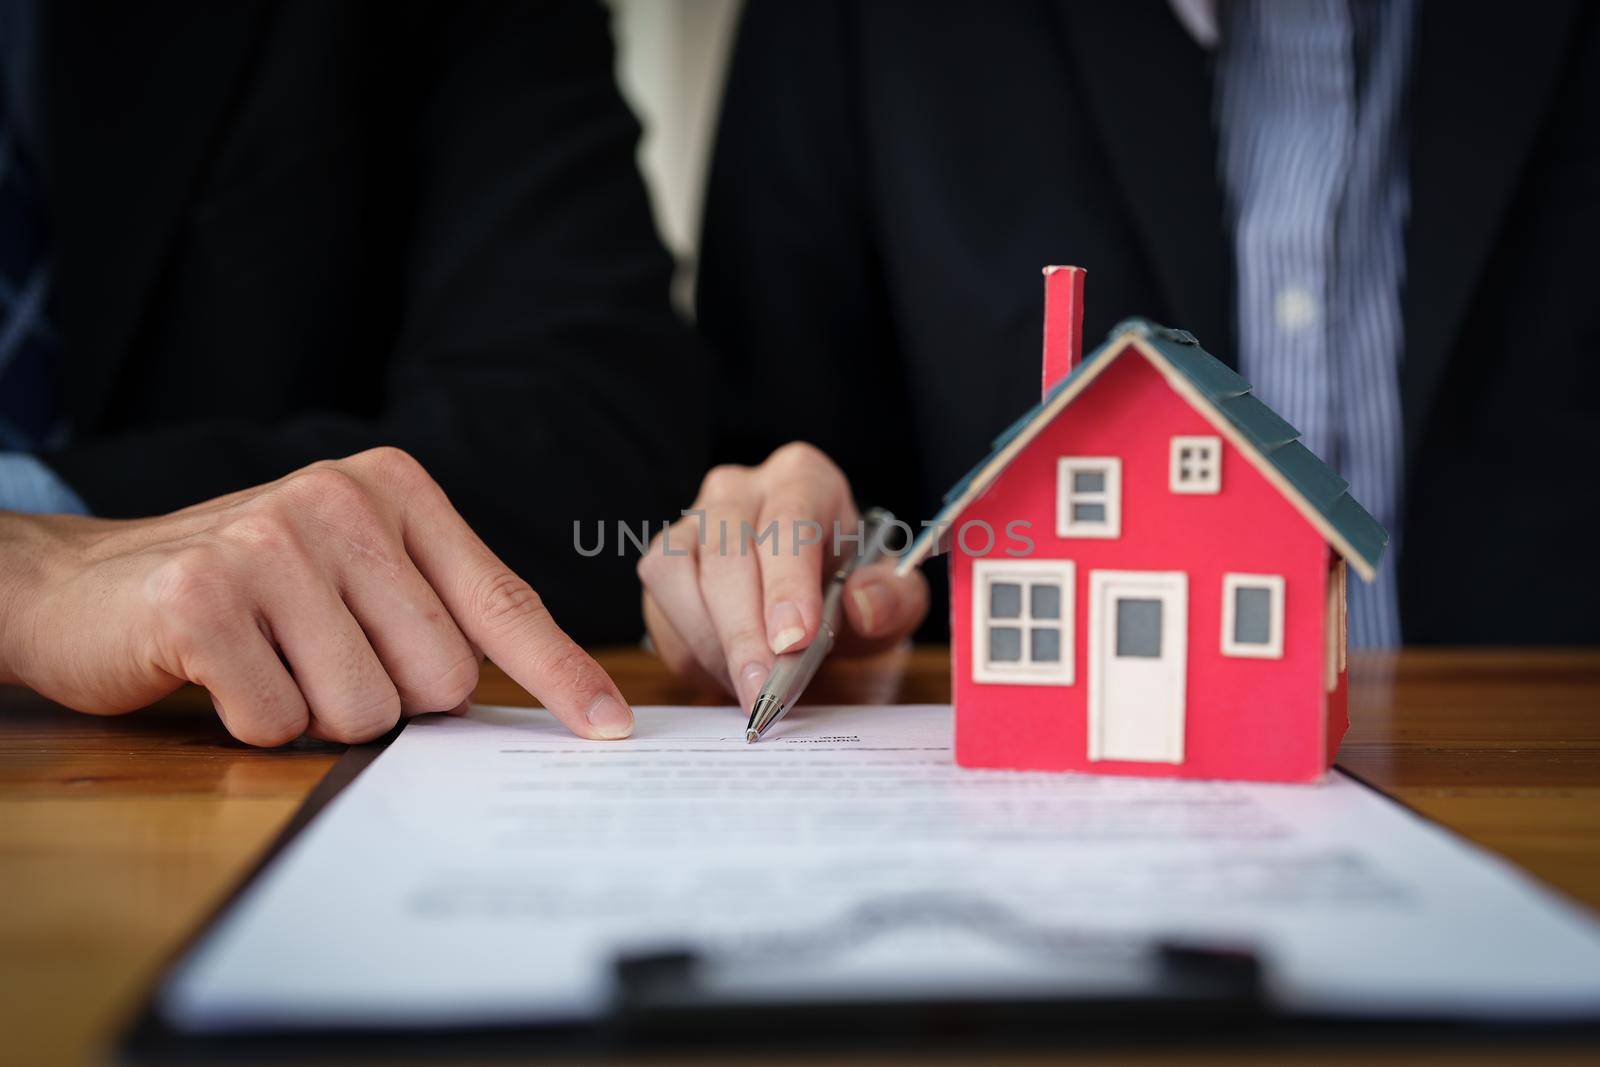 Guarantees, mortgages, signing, interest on loans, real estate agents are making agreements with customers to buy houses and land and sign contract documents by Manastrong